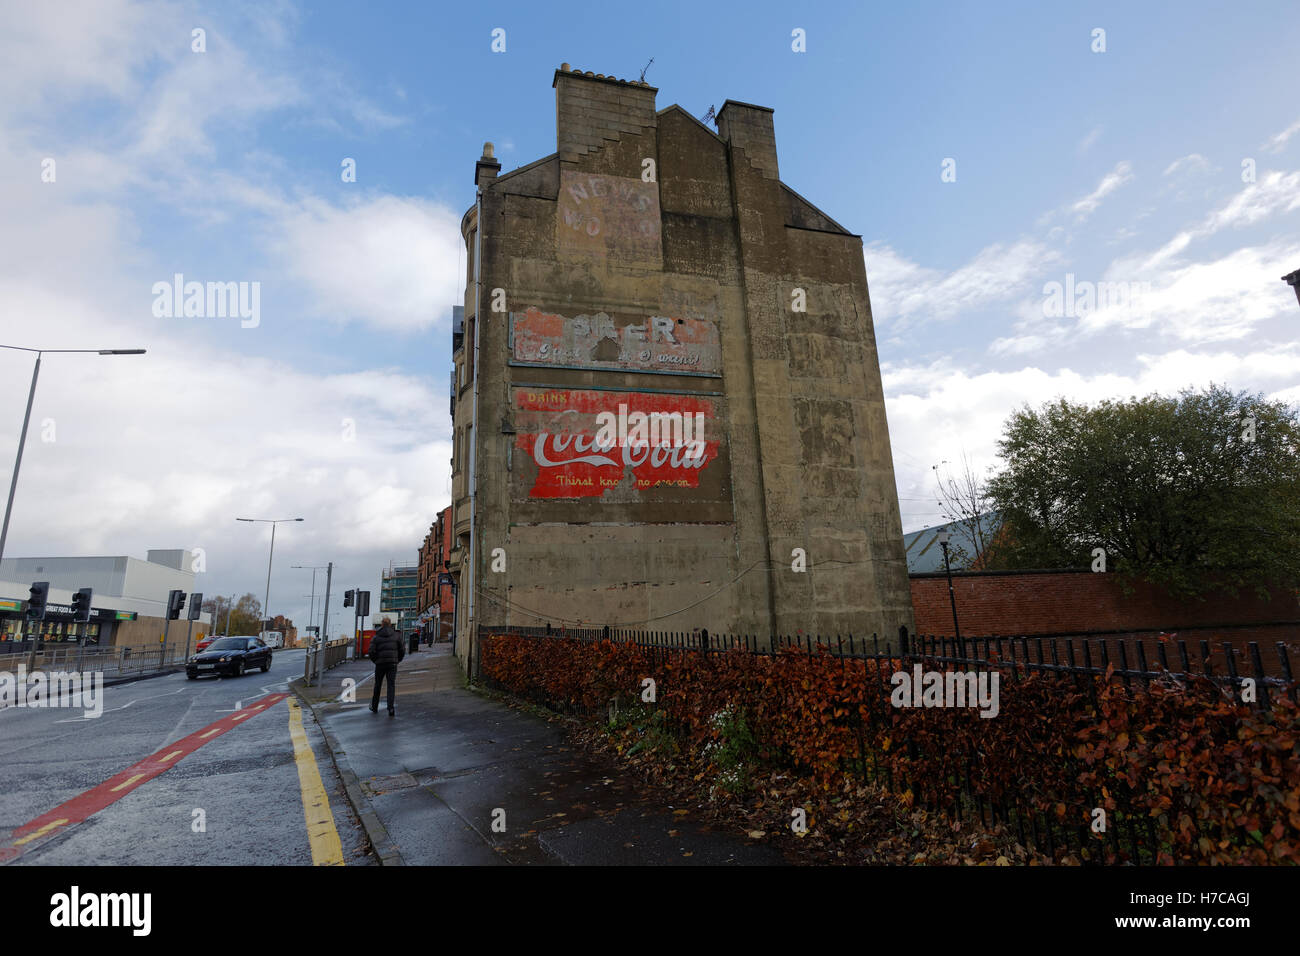 Old vintage advertising signs on the side of tenement building coke  coca cola news of the world and beer Stock Photo